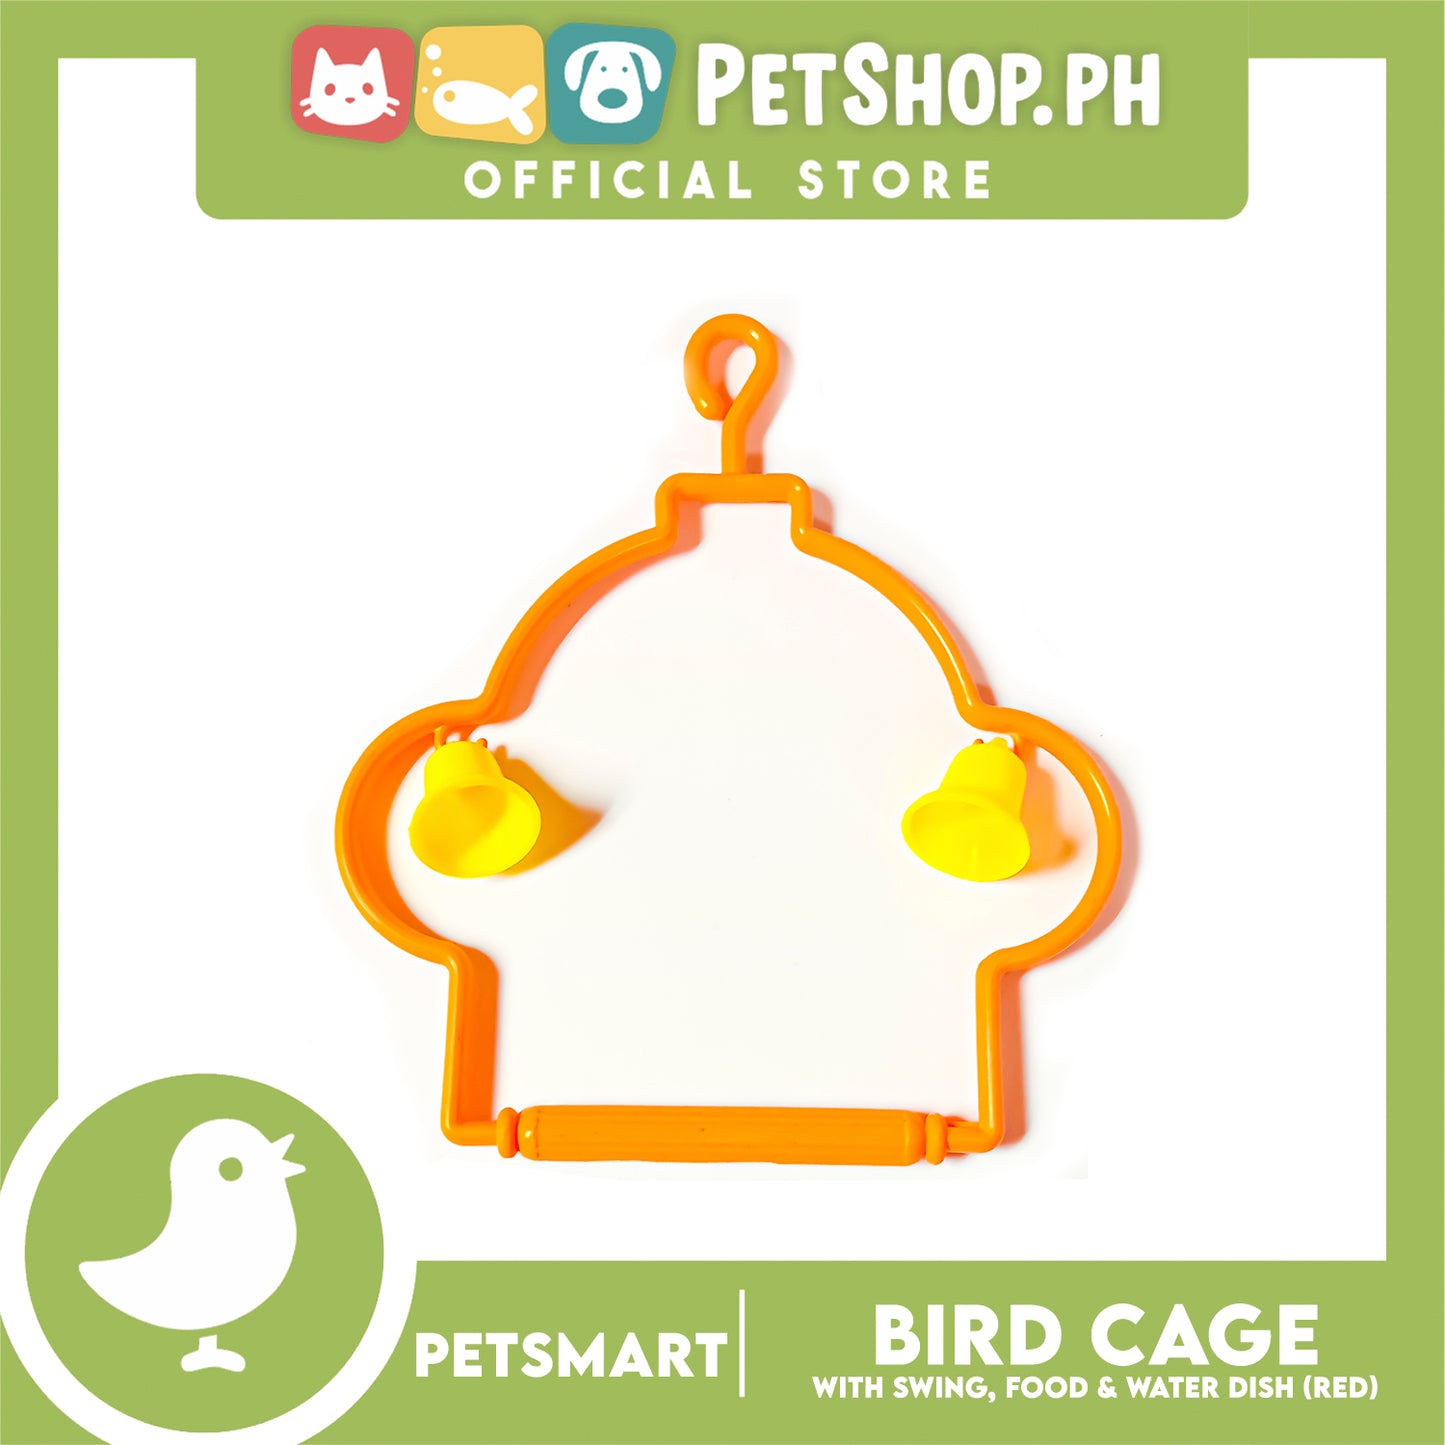 Bird Cage with Swing, Food and Water Dish (1000) Red Color, 30cm x 23cm x 40cm